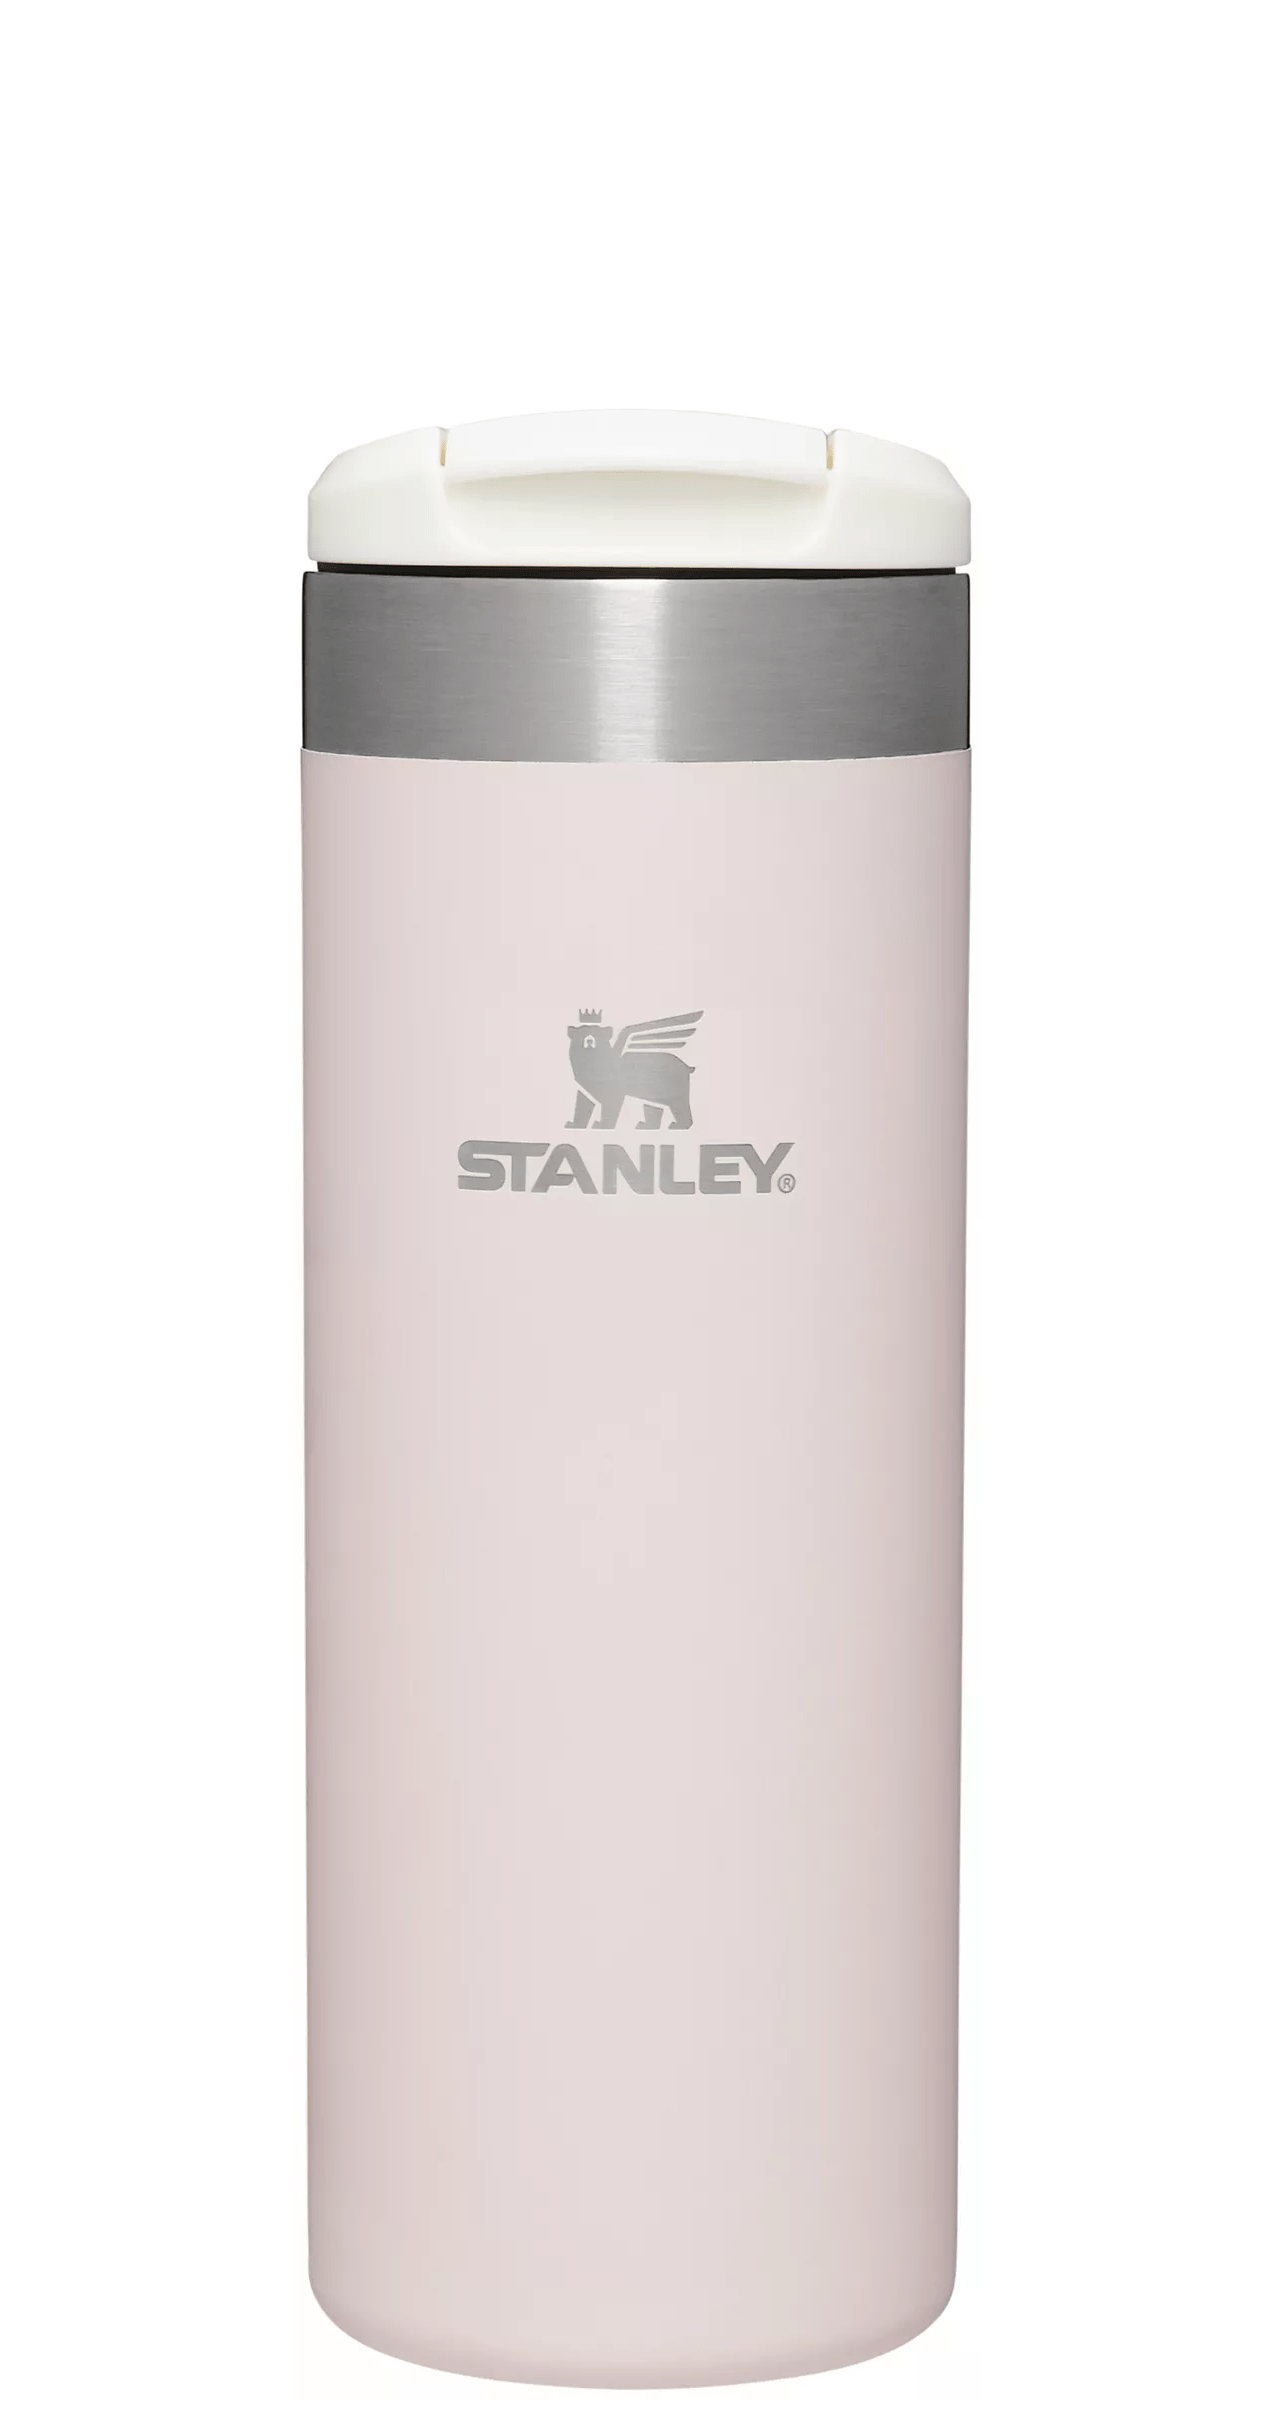 Stanley's best early Black Friday deals with discounts up to 60% off 